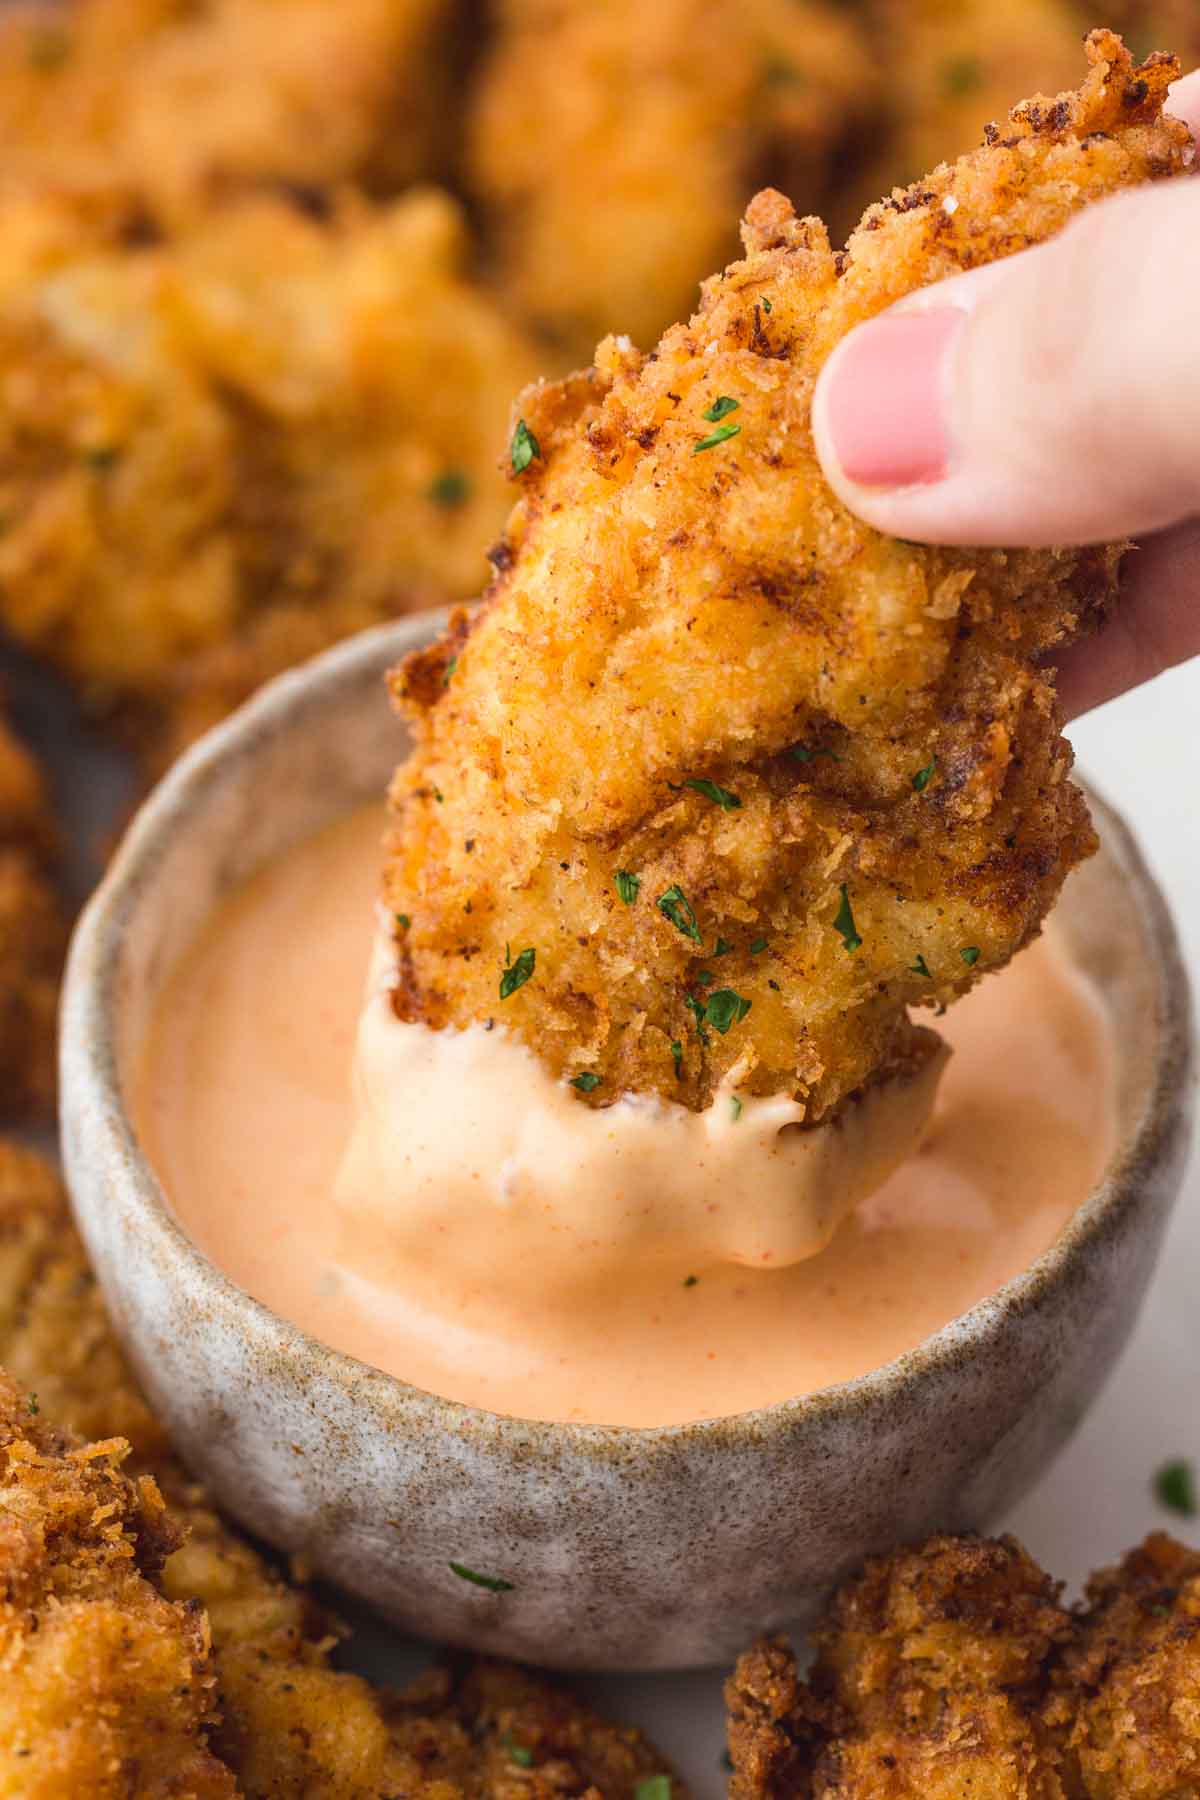 Dipping a crispy chicken tender in Cane's sauce